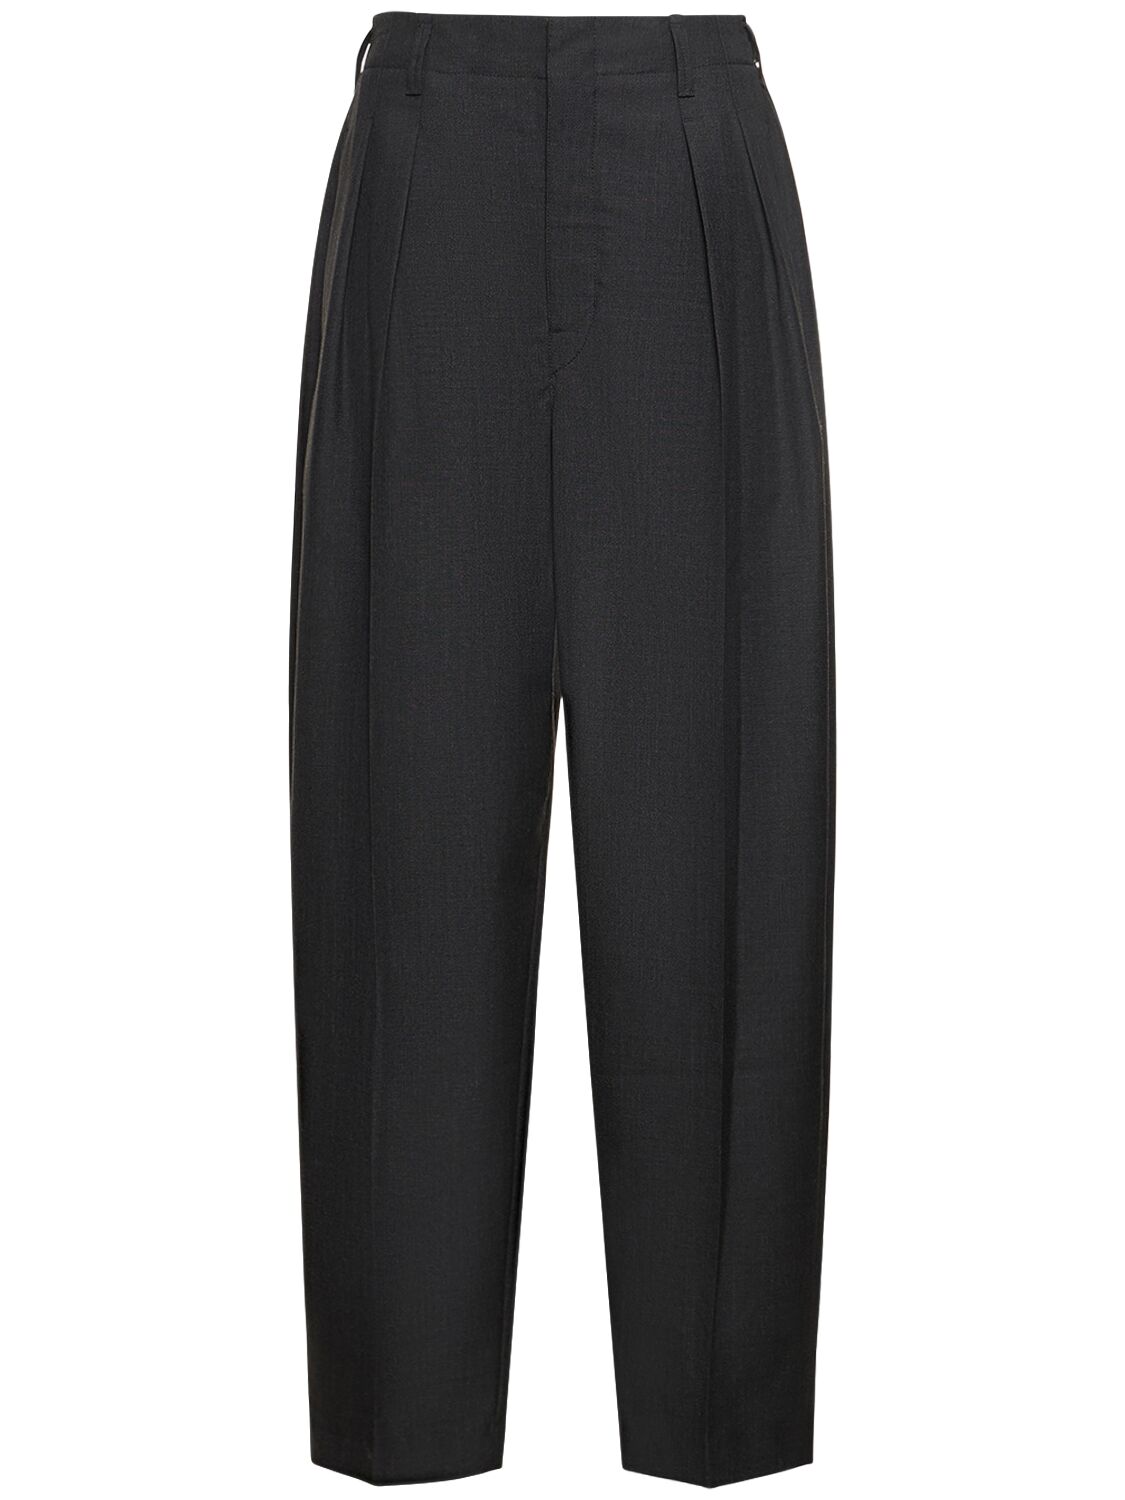 Image of Pleated Tapered Wool Blend Pants